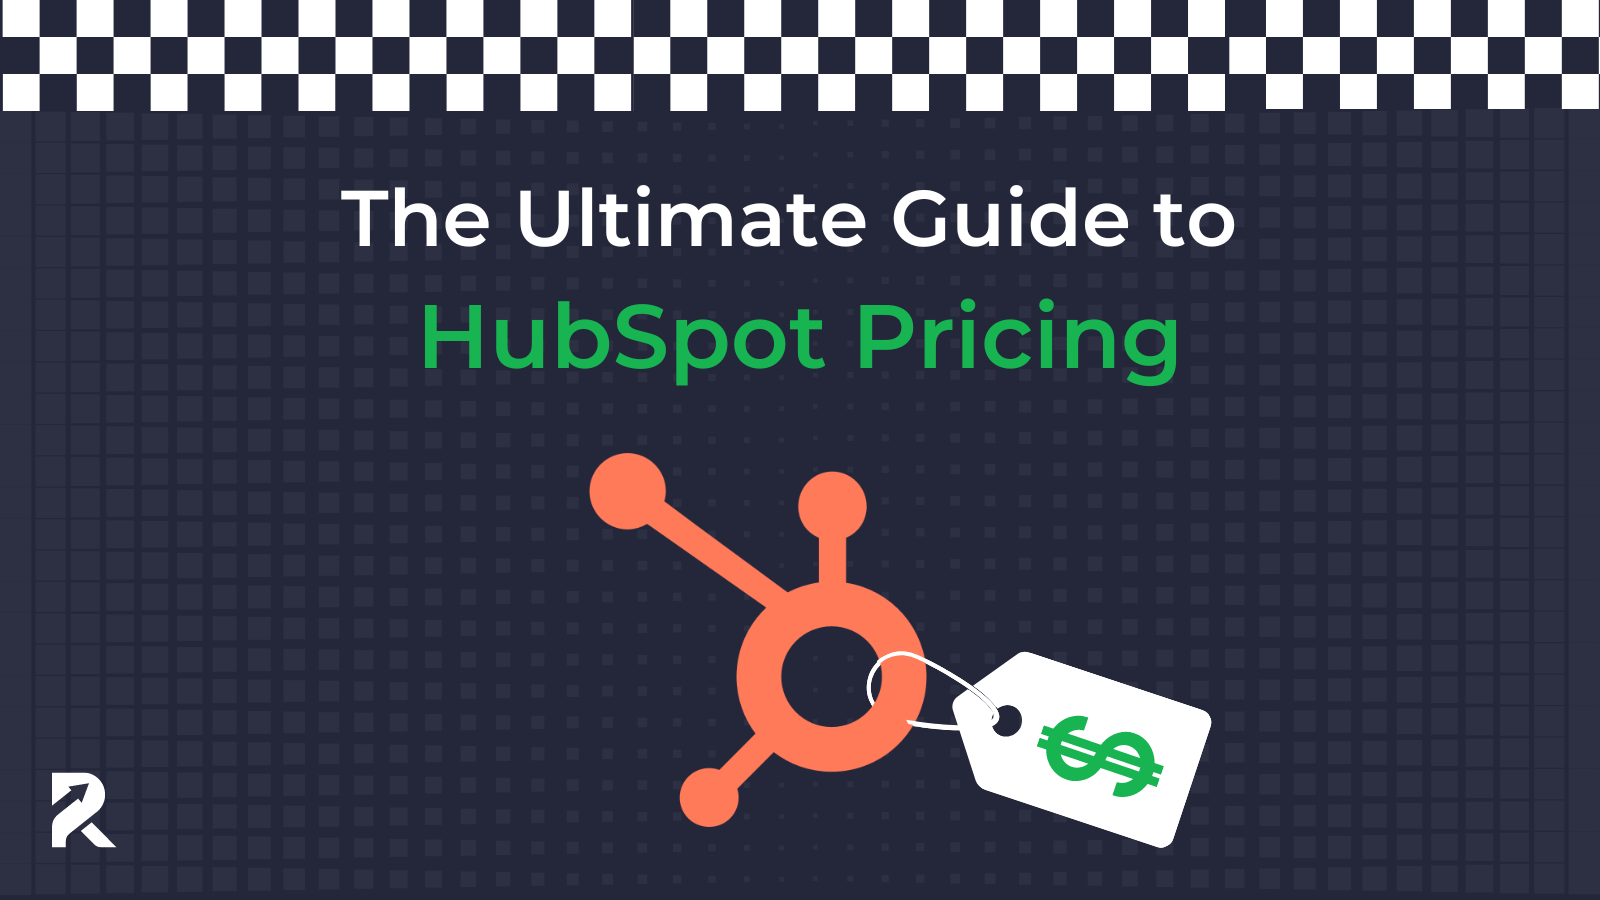 What Will my HubSpot Onboarding Fee Be?